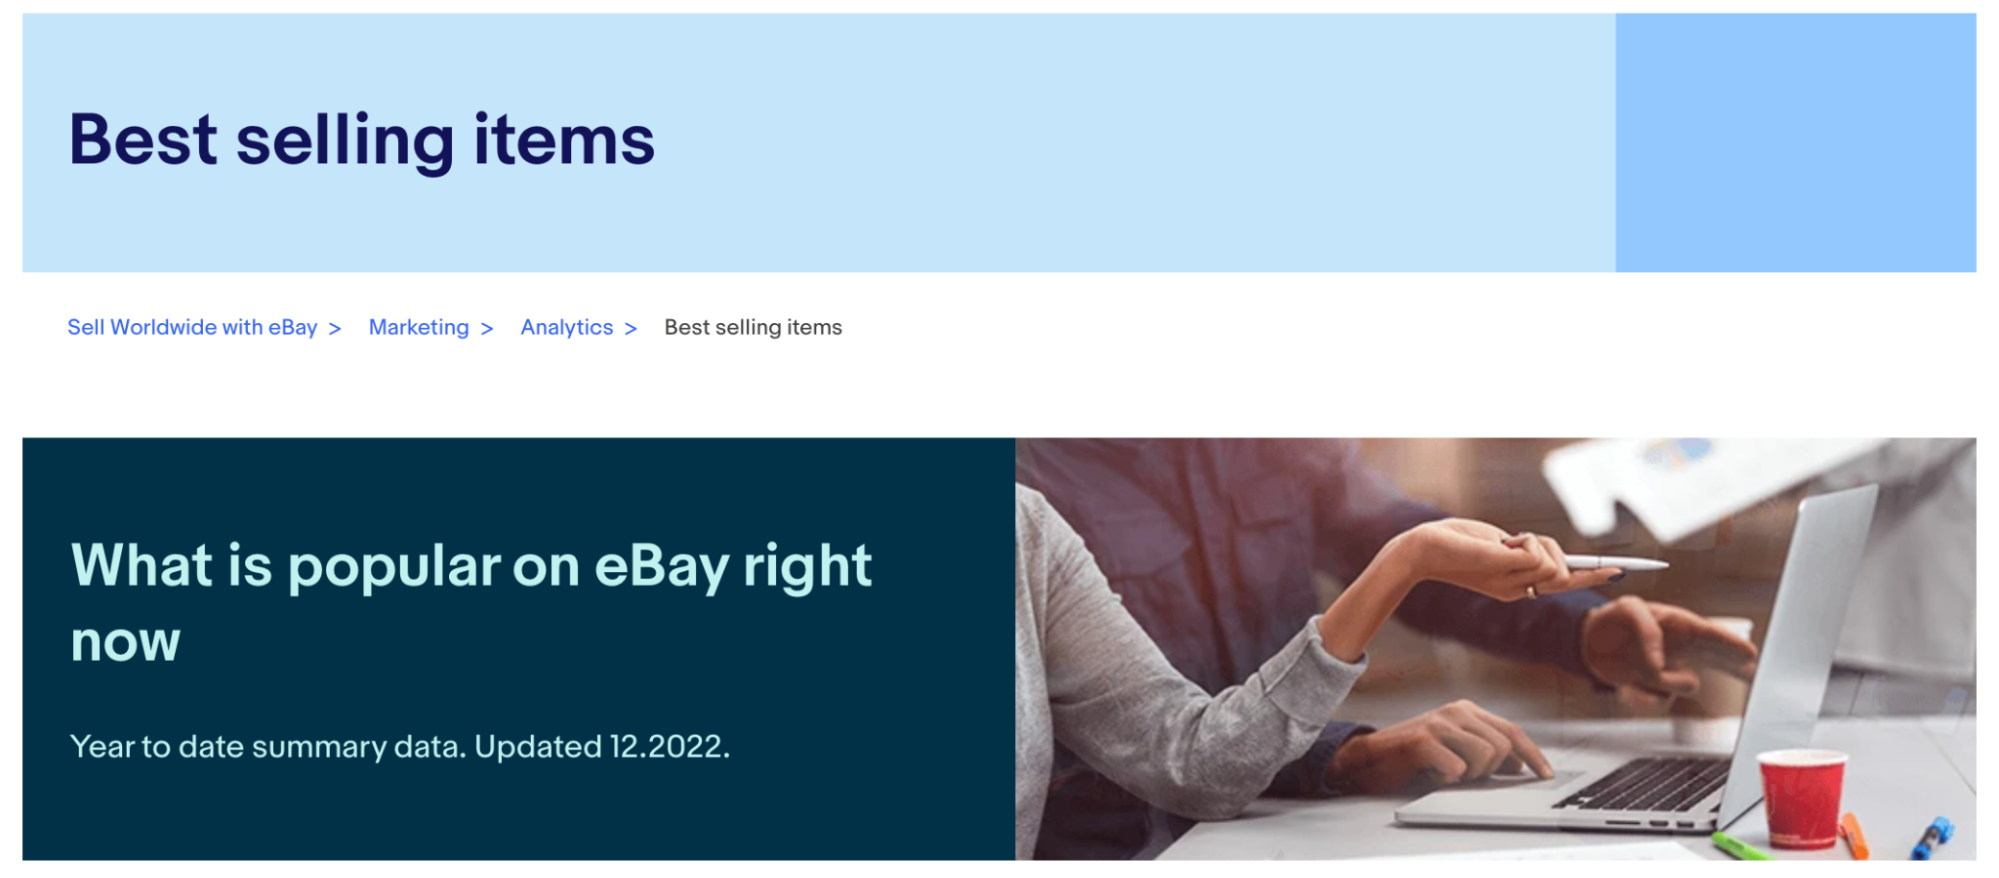 Interface of eBay bestselling items.